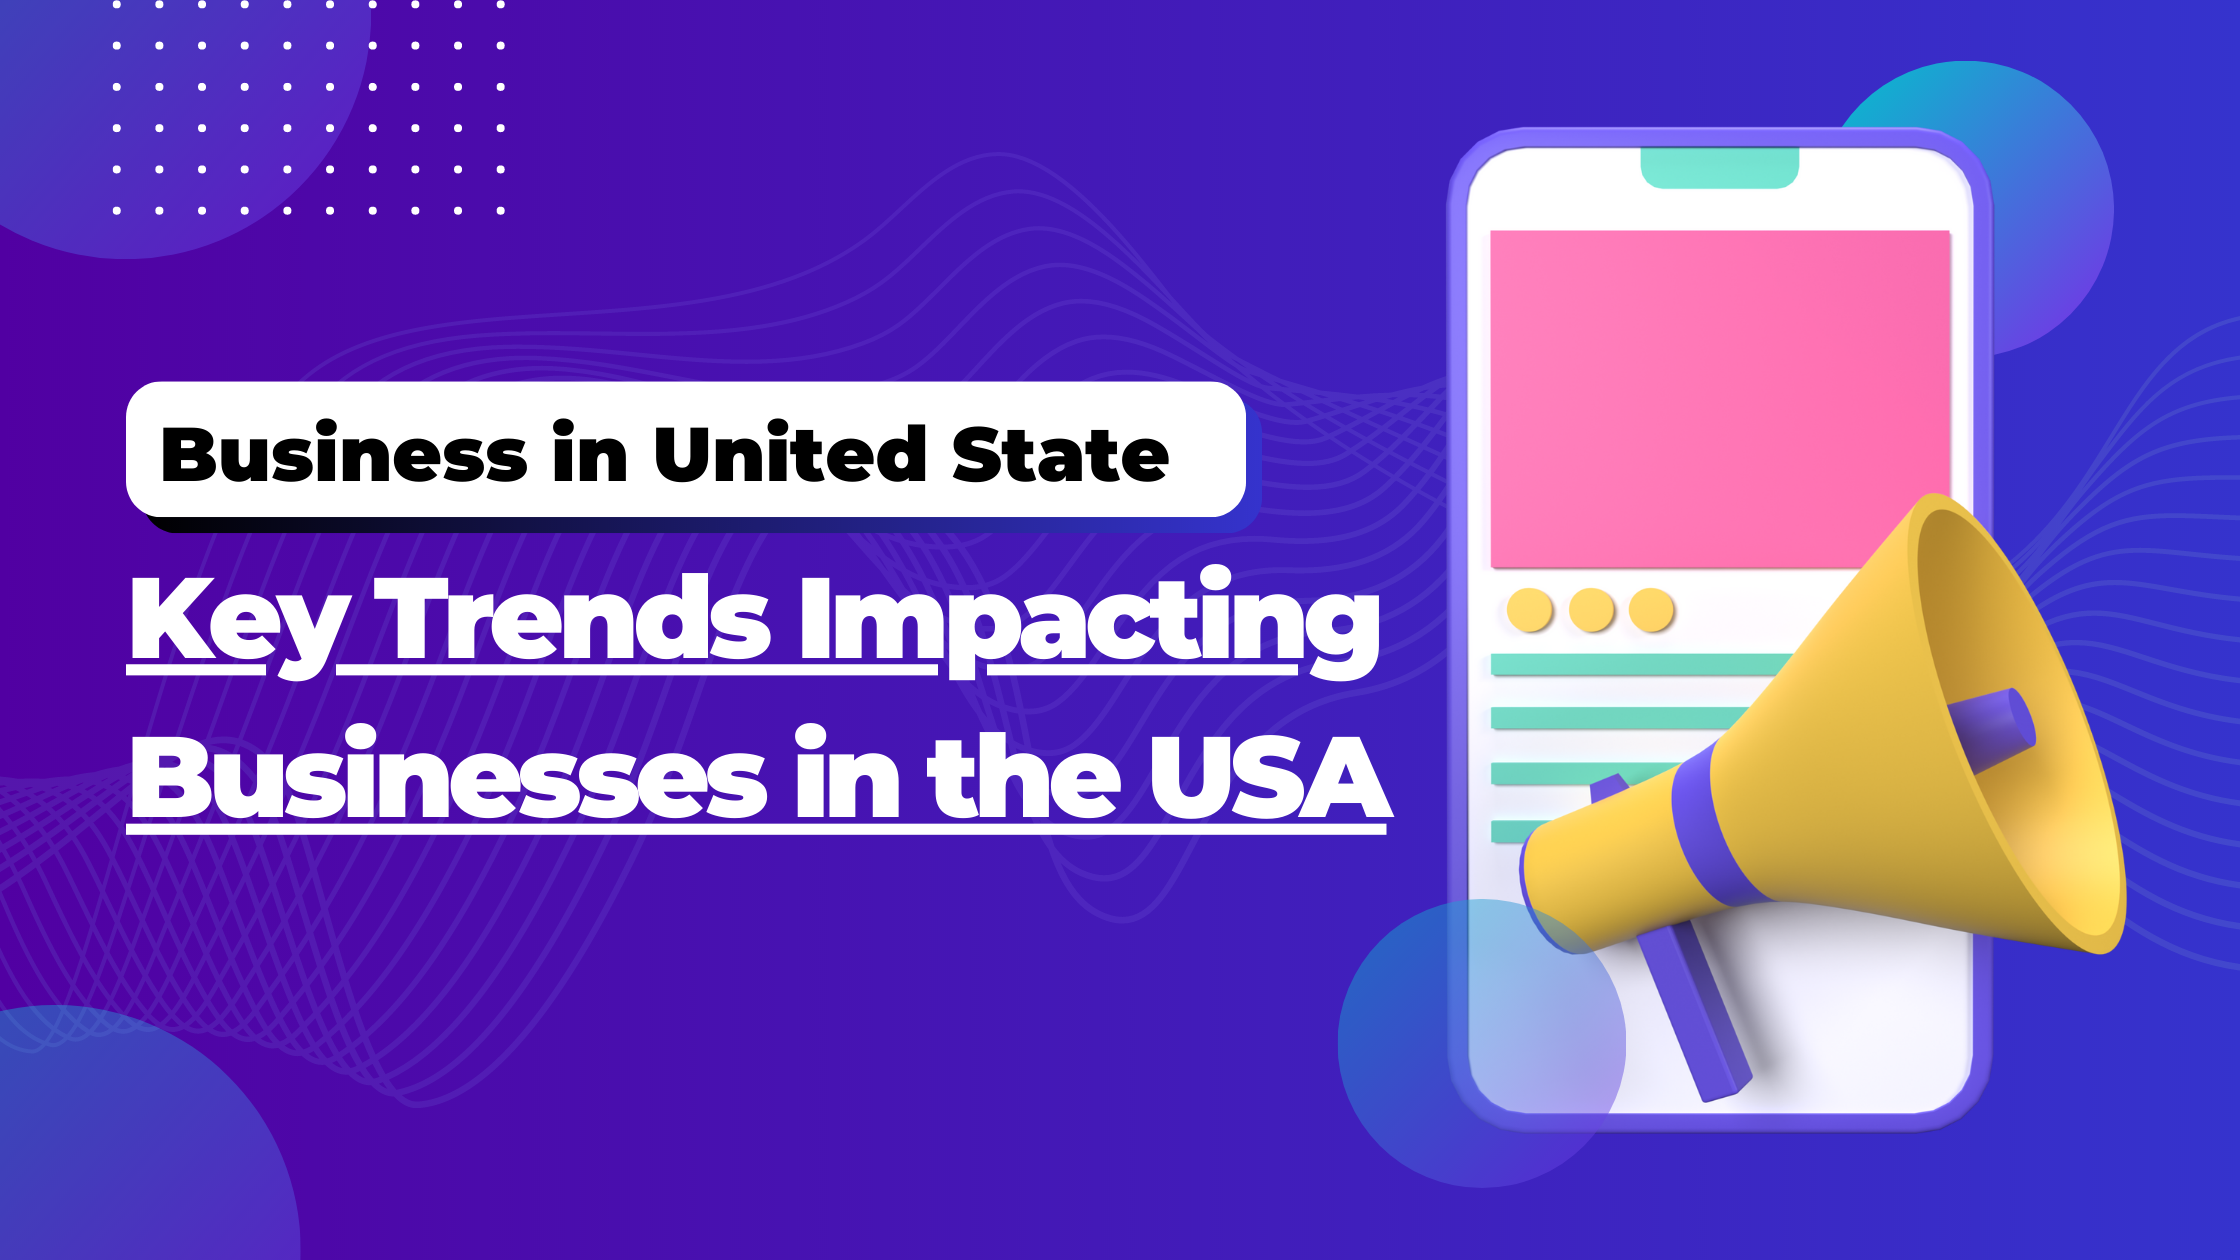 Key Trends Impacting Businesses in the USA